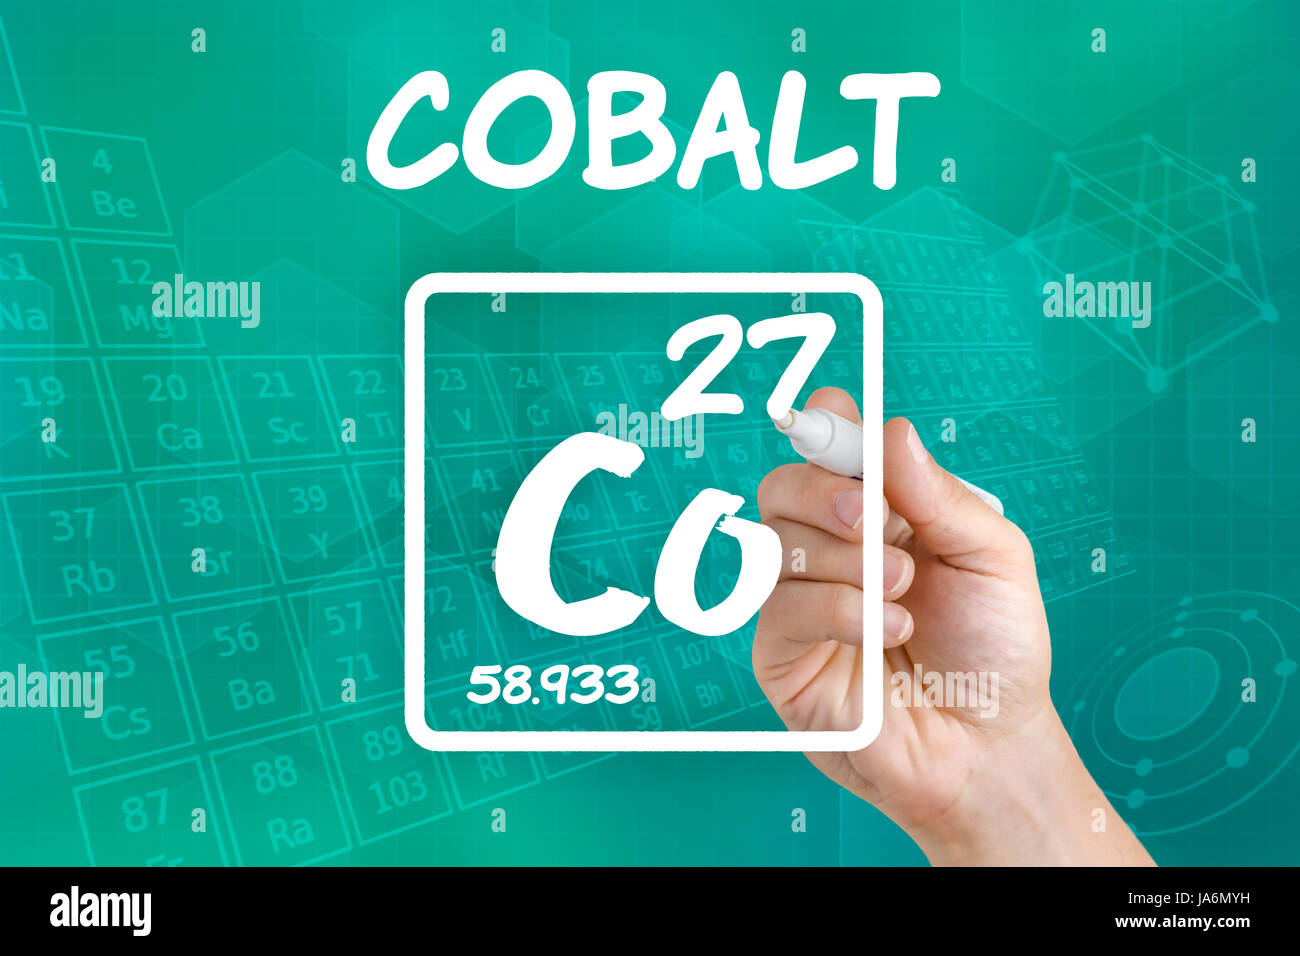 symbol of the chemical element cobalt Stock Photo